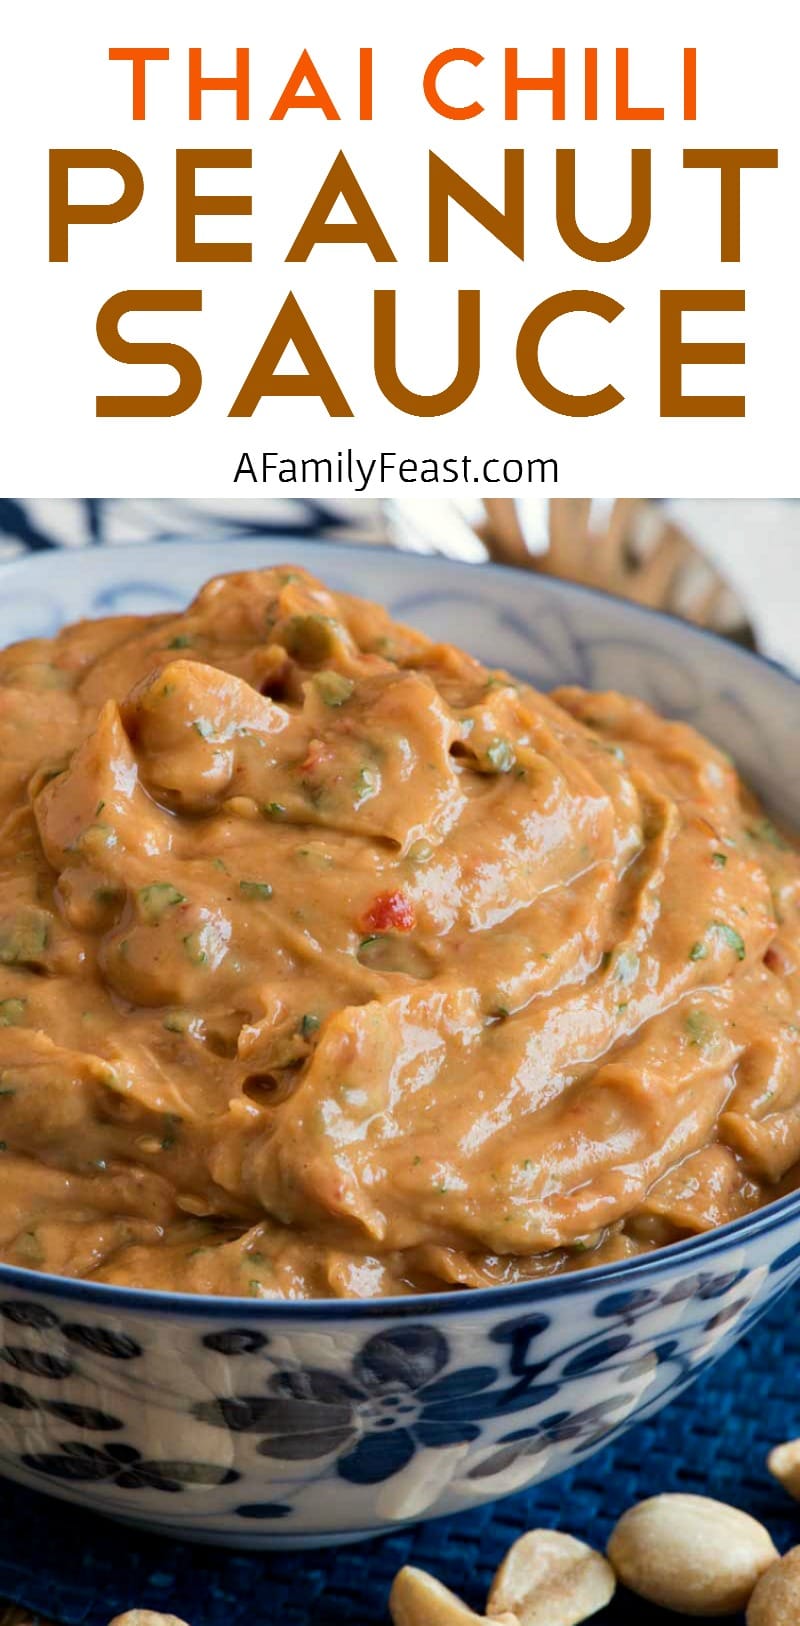 Thai Chili Peanut Sauce - An easy and addictively good peanut sauce with a kick of Thai spices and flavors.